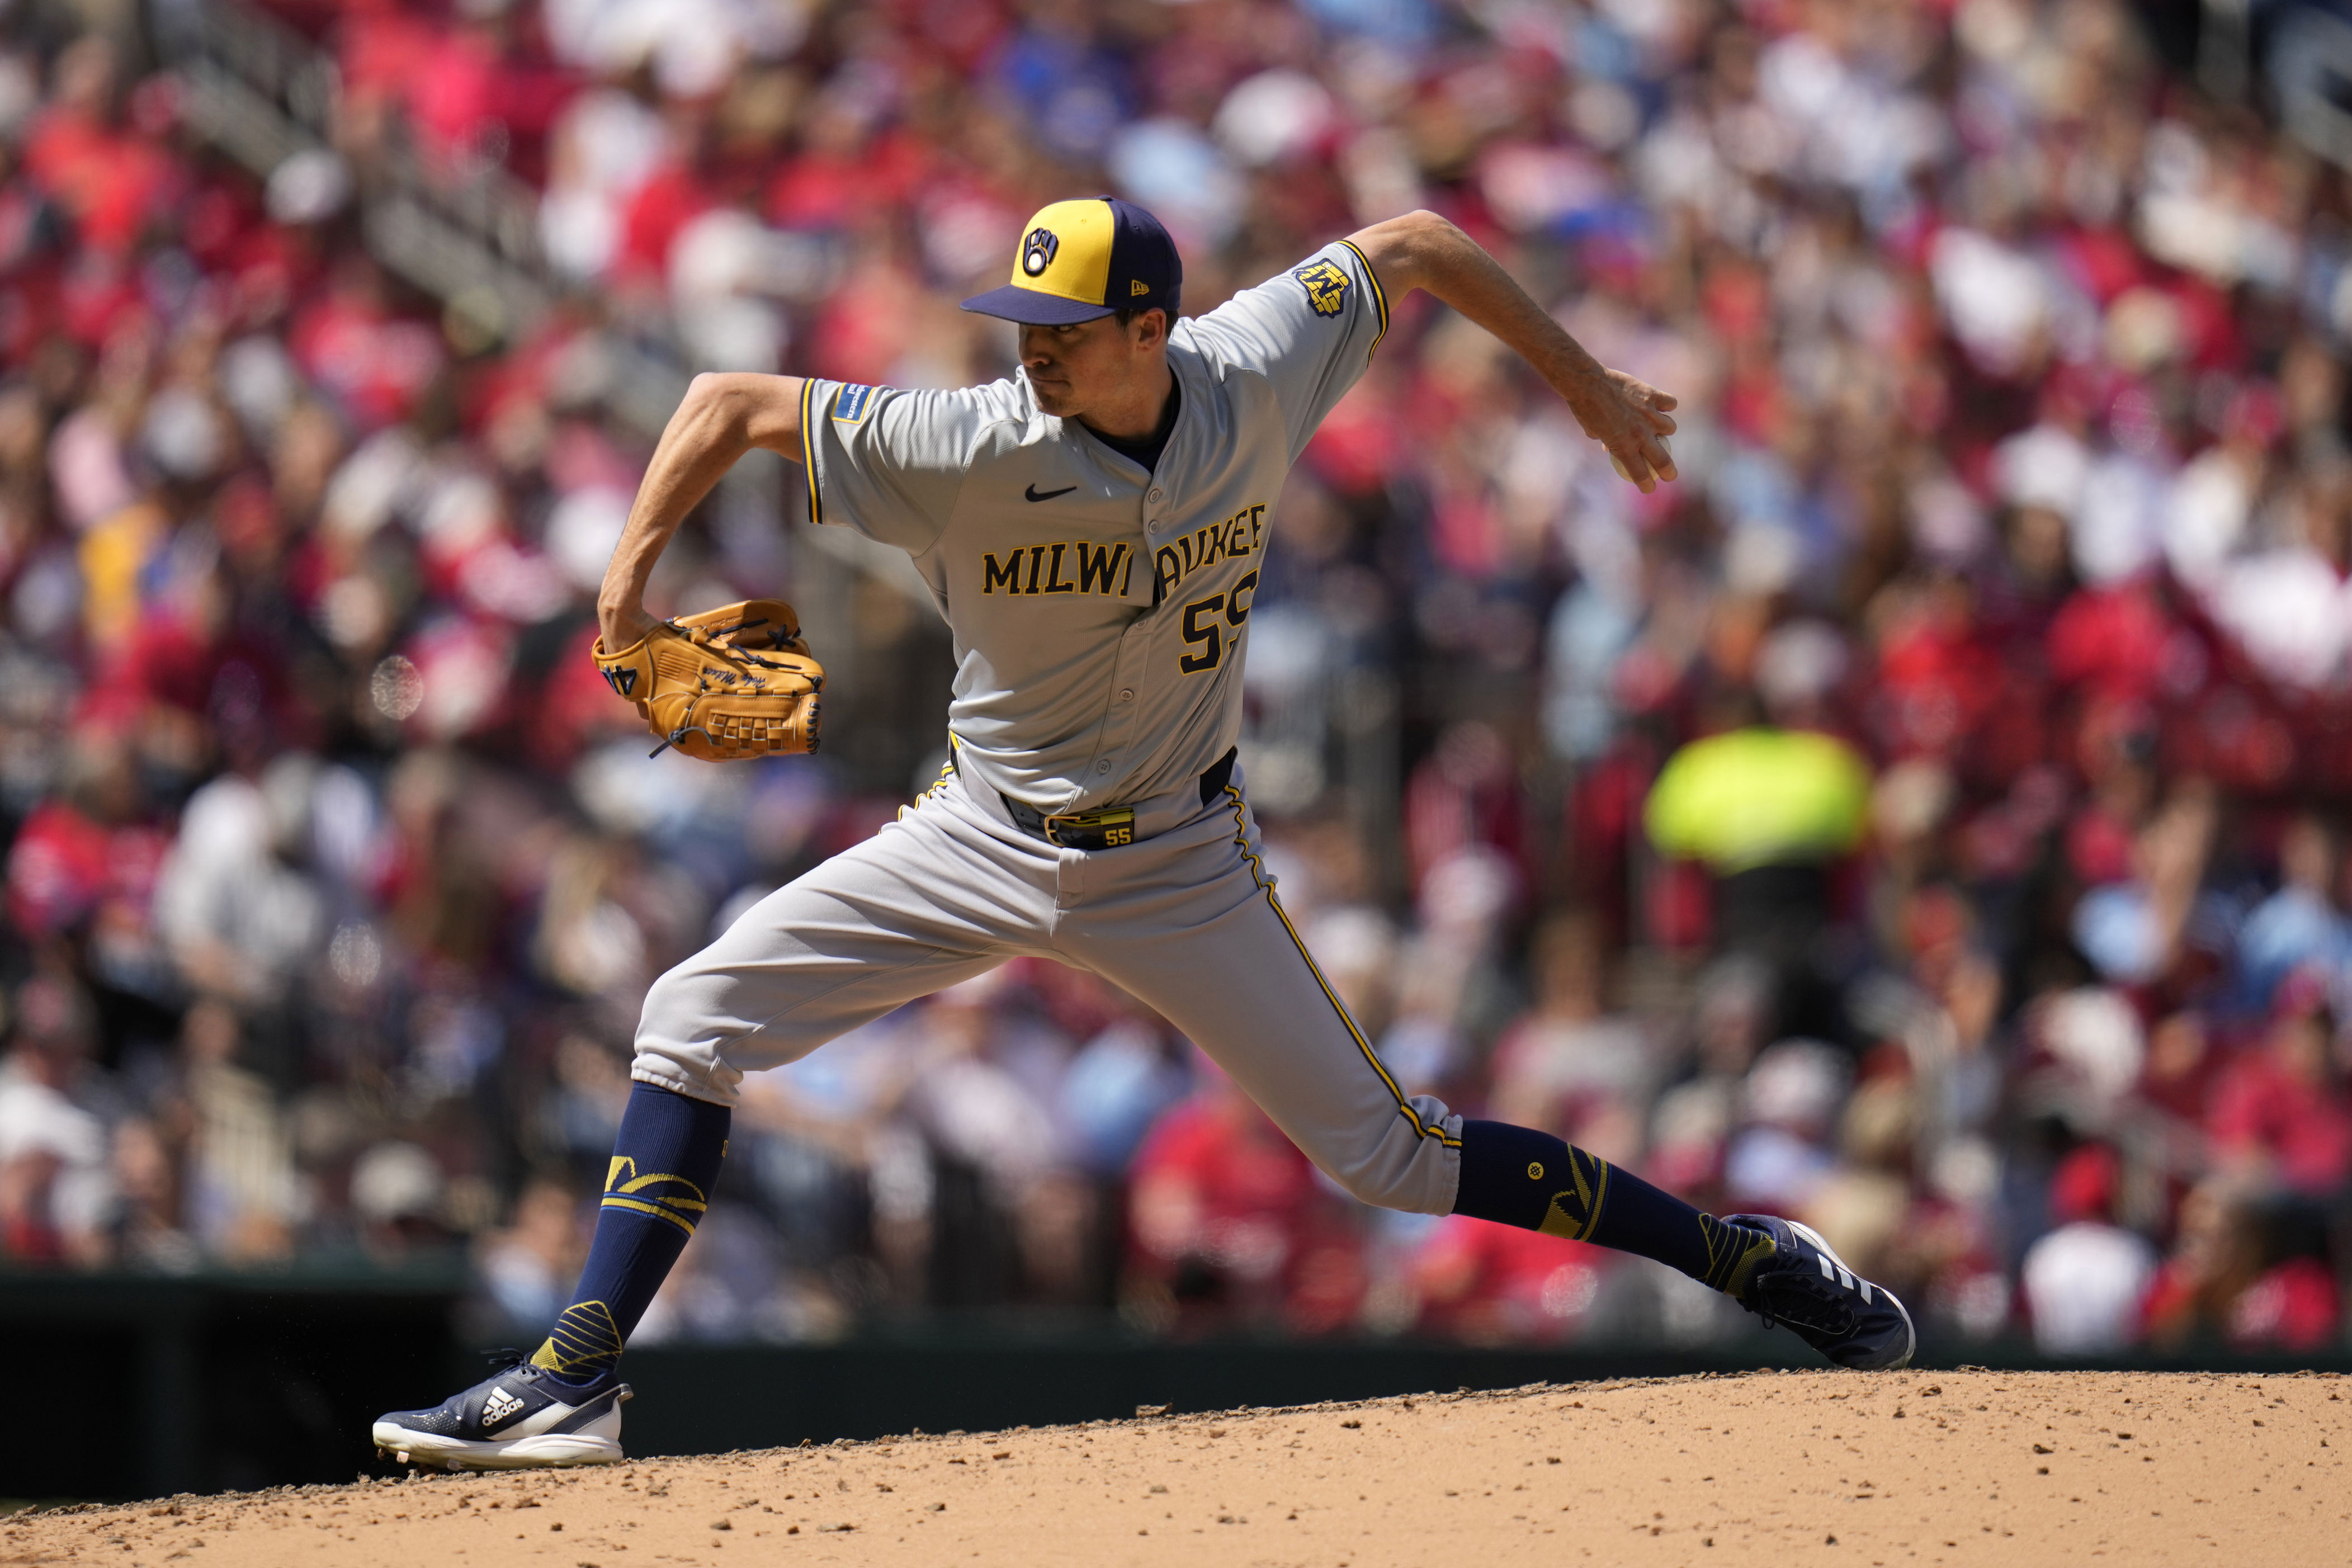 brice turang and jackson chourio hit back-to-back homers as brewers beat cardinals 12-5